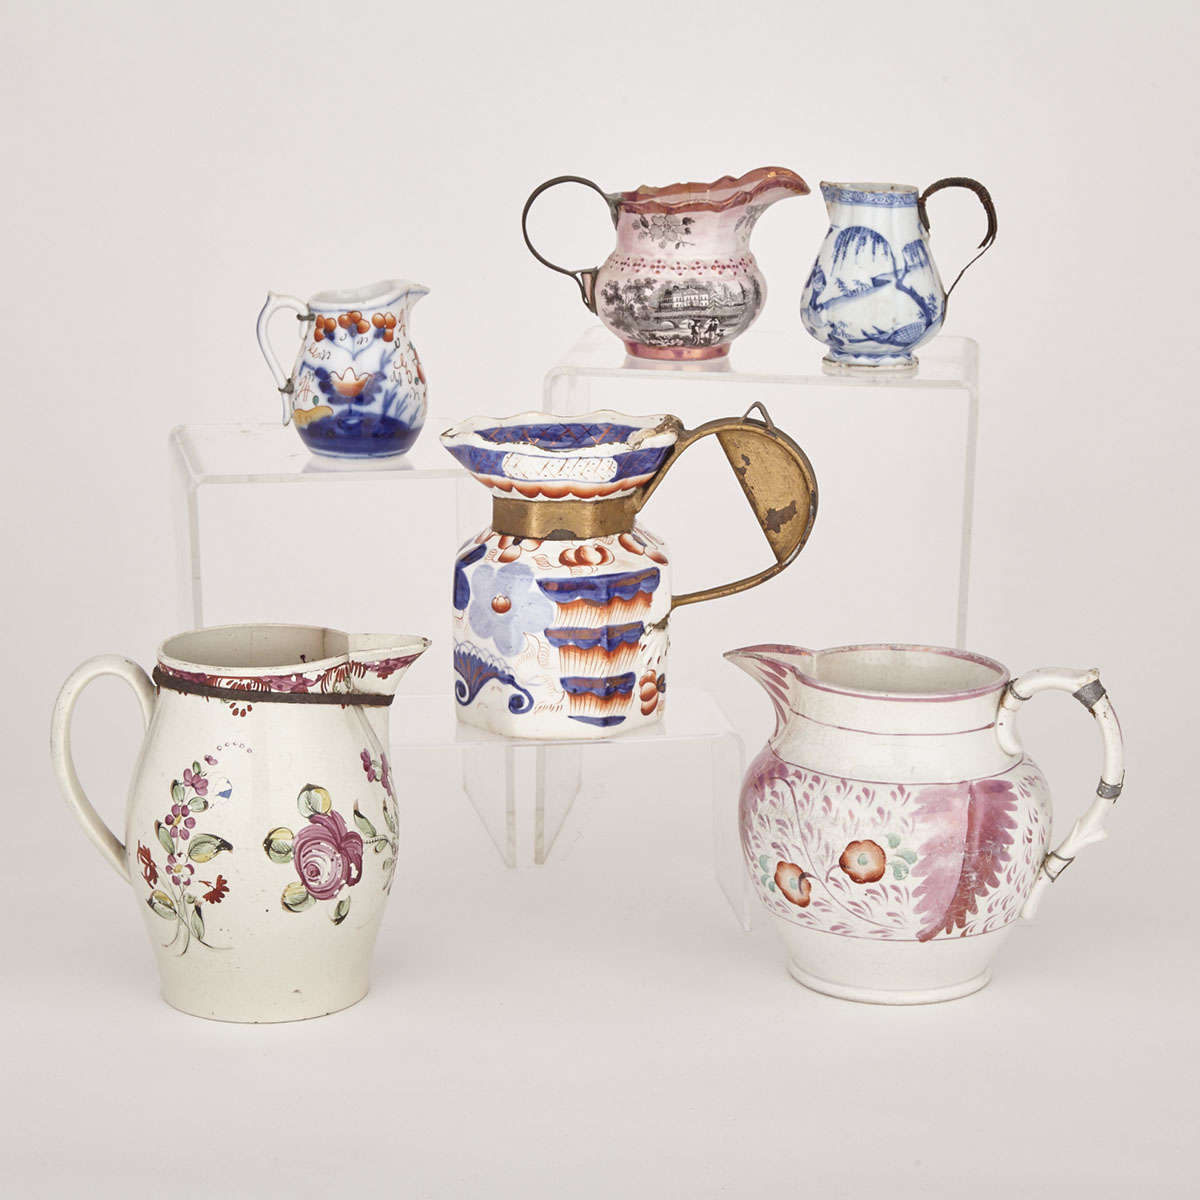 Collection of Six Earthenware Jugs and Creamers with ‘Make Do’ Repairs, 19th century